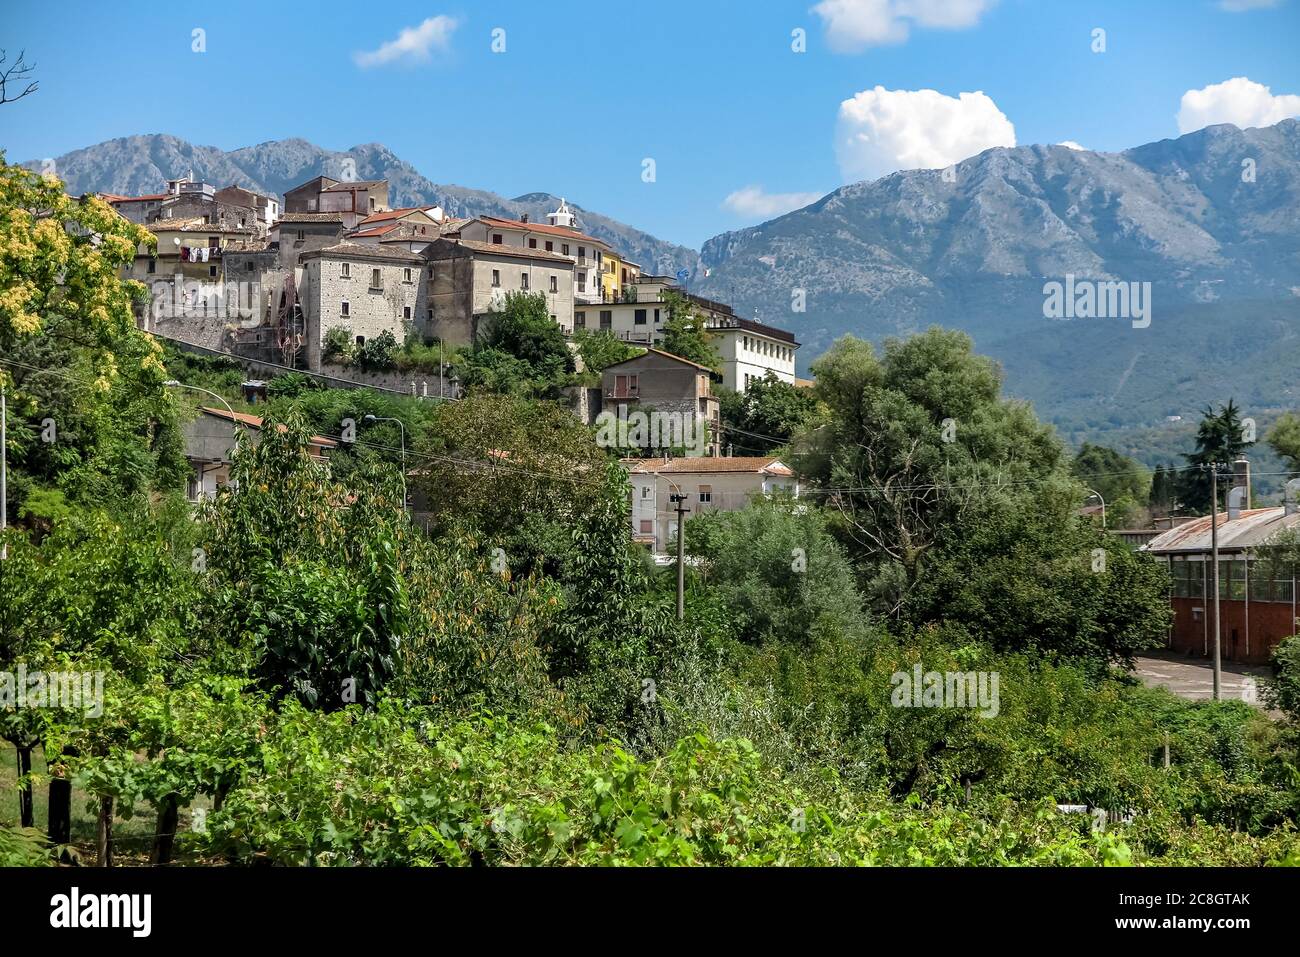 Small medieval Italian town on top of a hill, with high mountains in the background, commune of Pratella Stock Photo